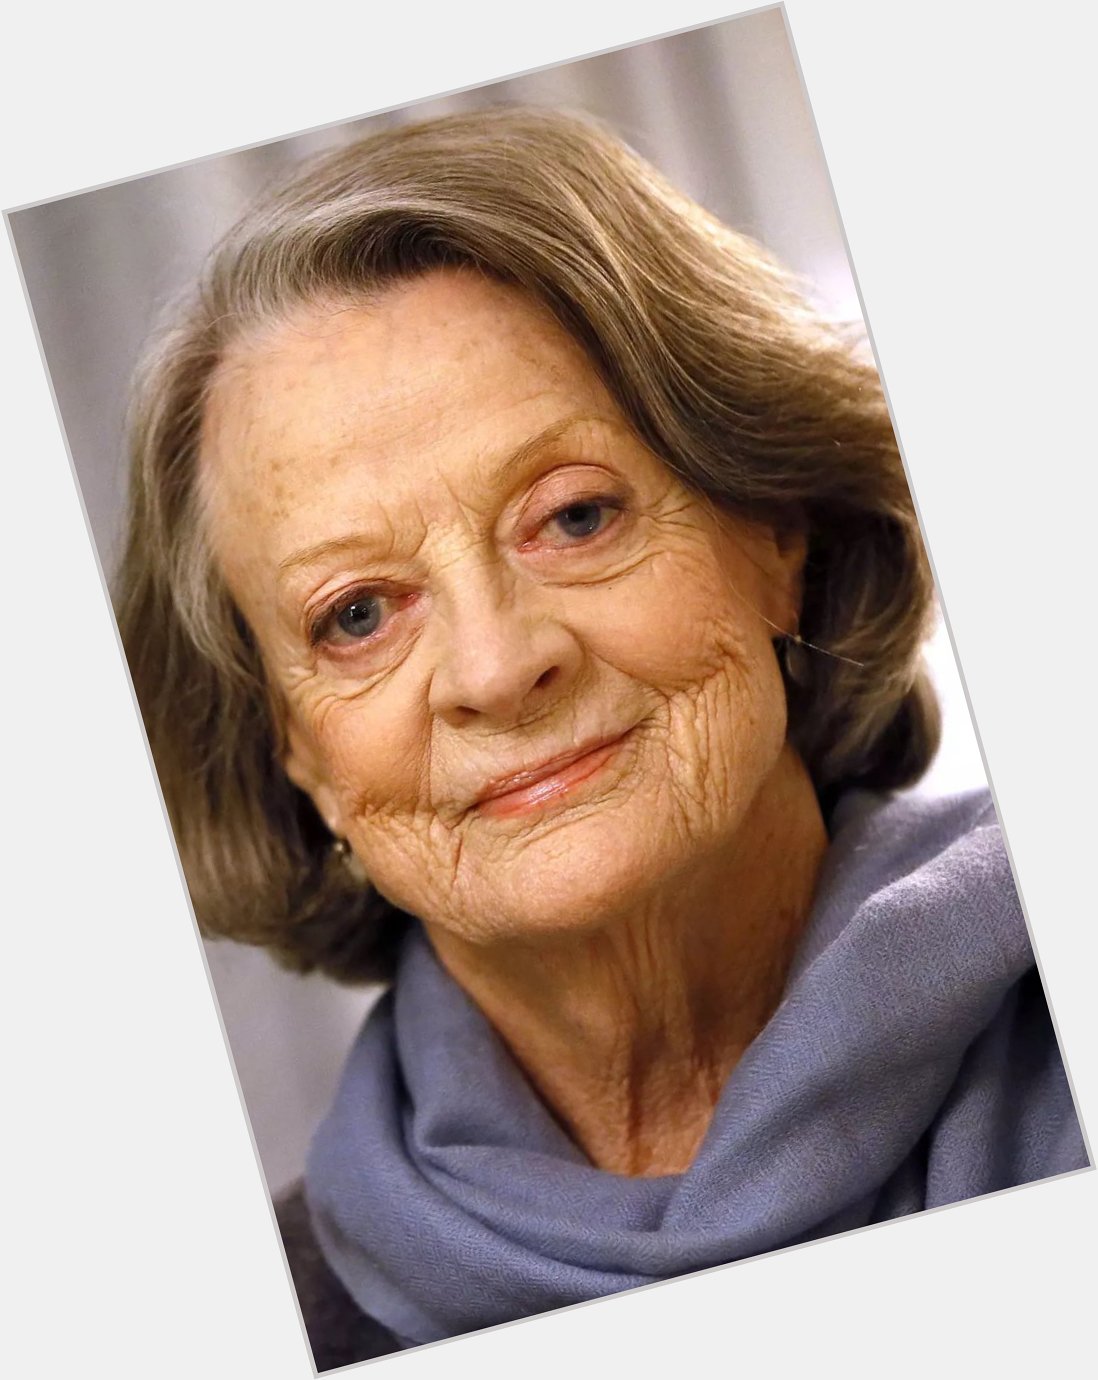  Happy birthday to Dame Maggie Smith who portrayed Minerva McGonagall in the films! 